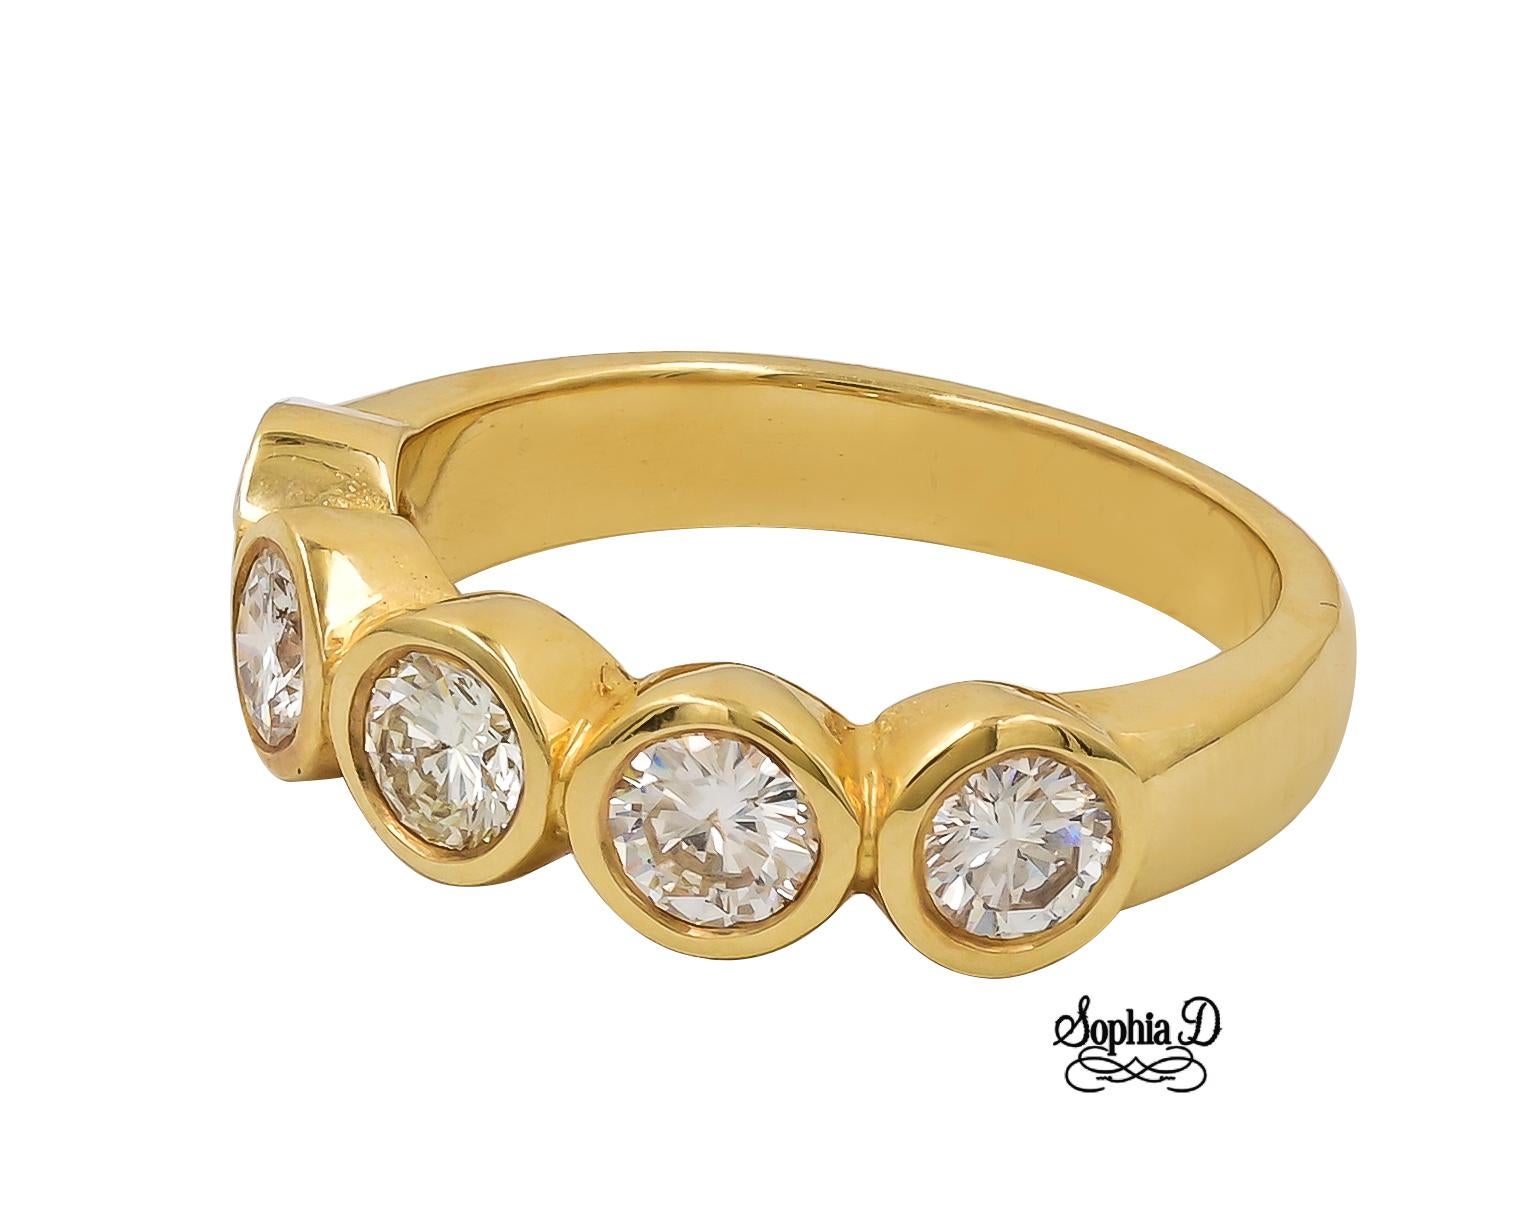 18K yellow gold diamond ring with 5 small round diamonds.

Sophia D by Joseph Dardashti LTD has been known worldwide for 35 years and are inspired by classic Art Deco design that merges with modern manufacturing techniques.  